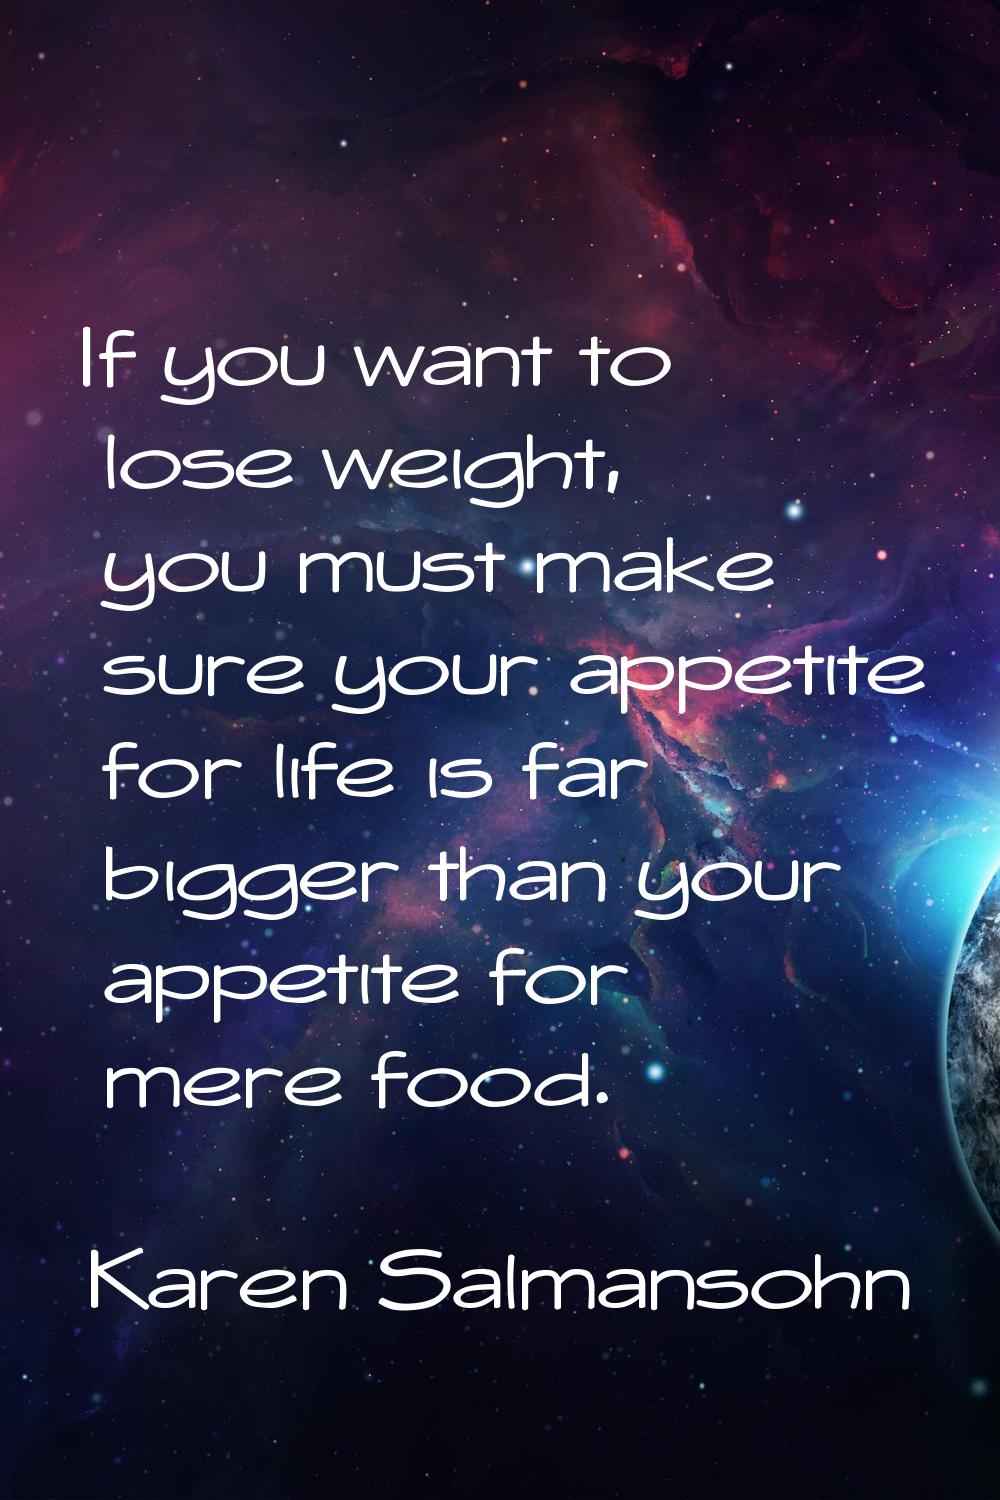 If you want to lose weight, you must make sure your appetite for life is far bigger than your appet